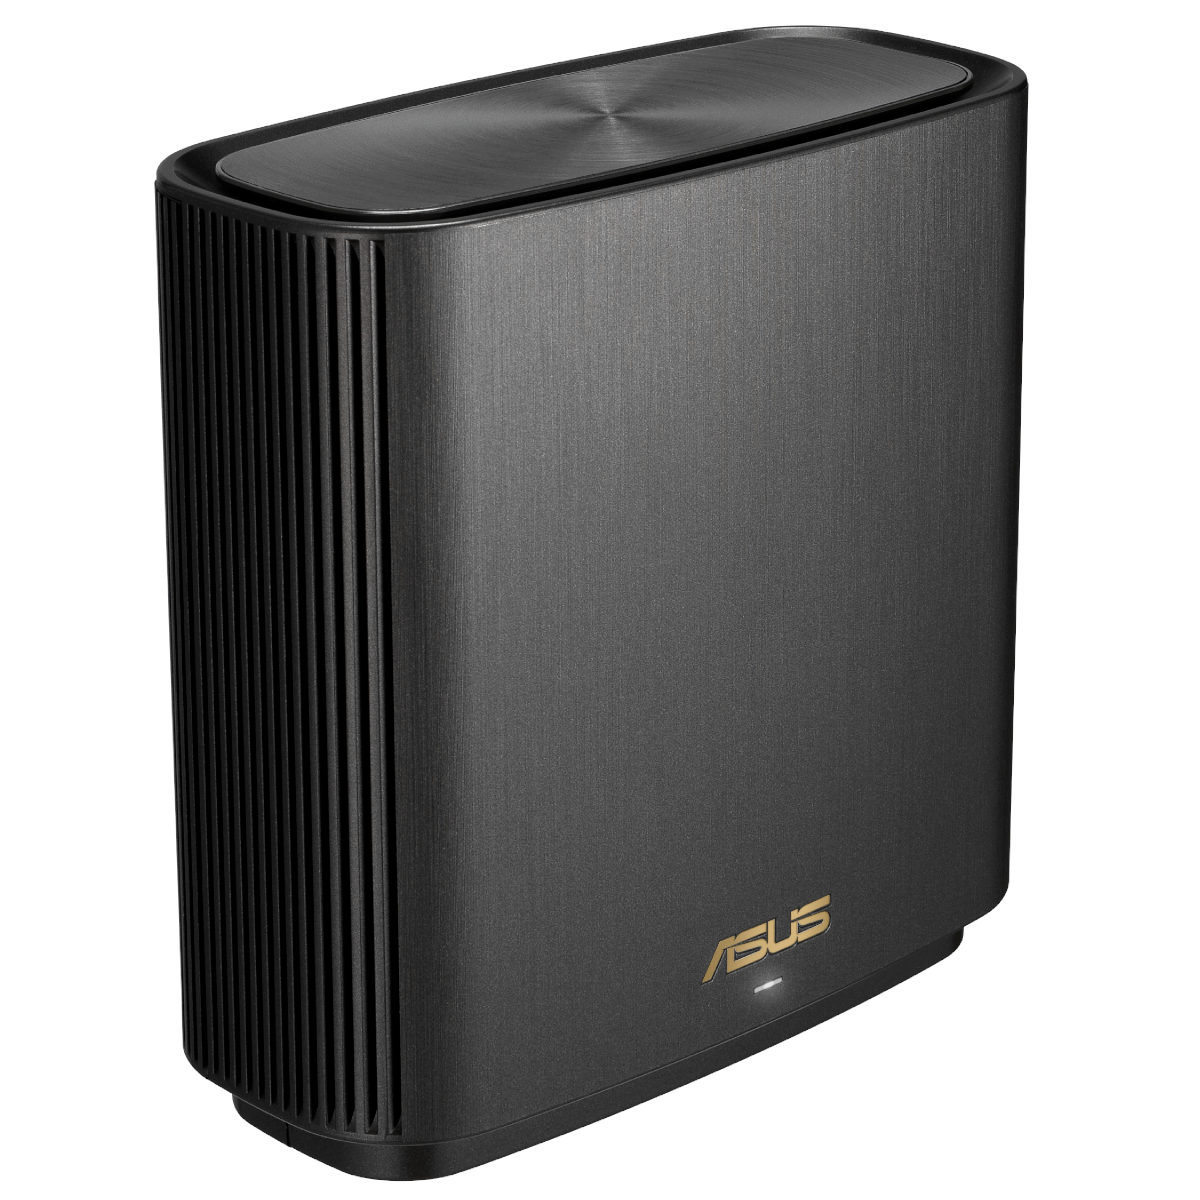 Asus - ASUS ZenWifi AX (XT8) AX6600 WiFi 6 Mesh System Pack of 1 - Black